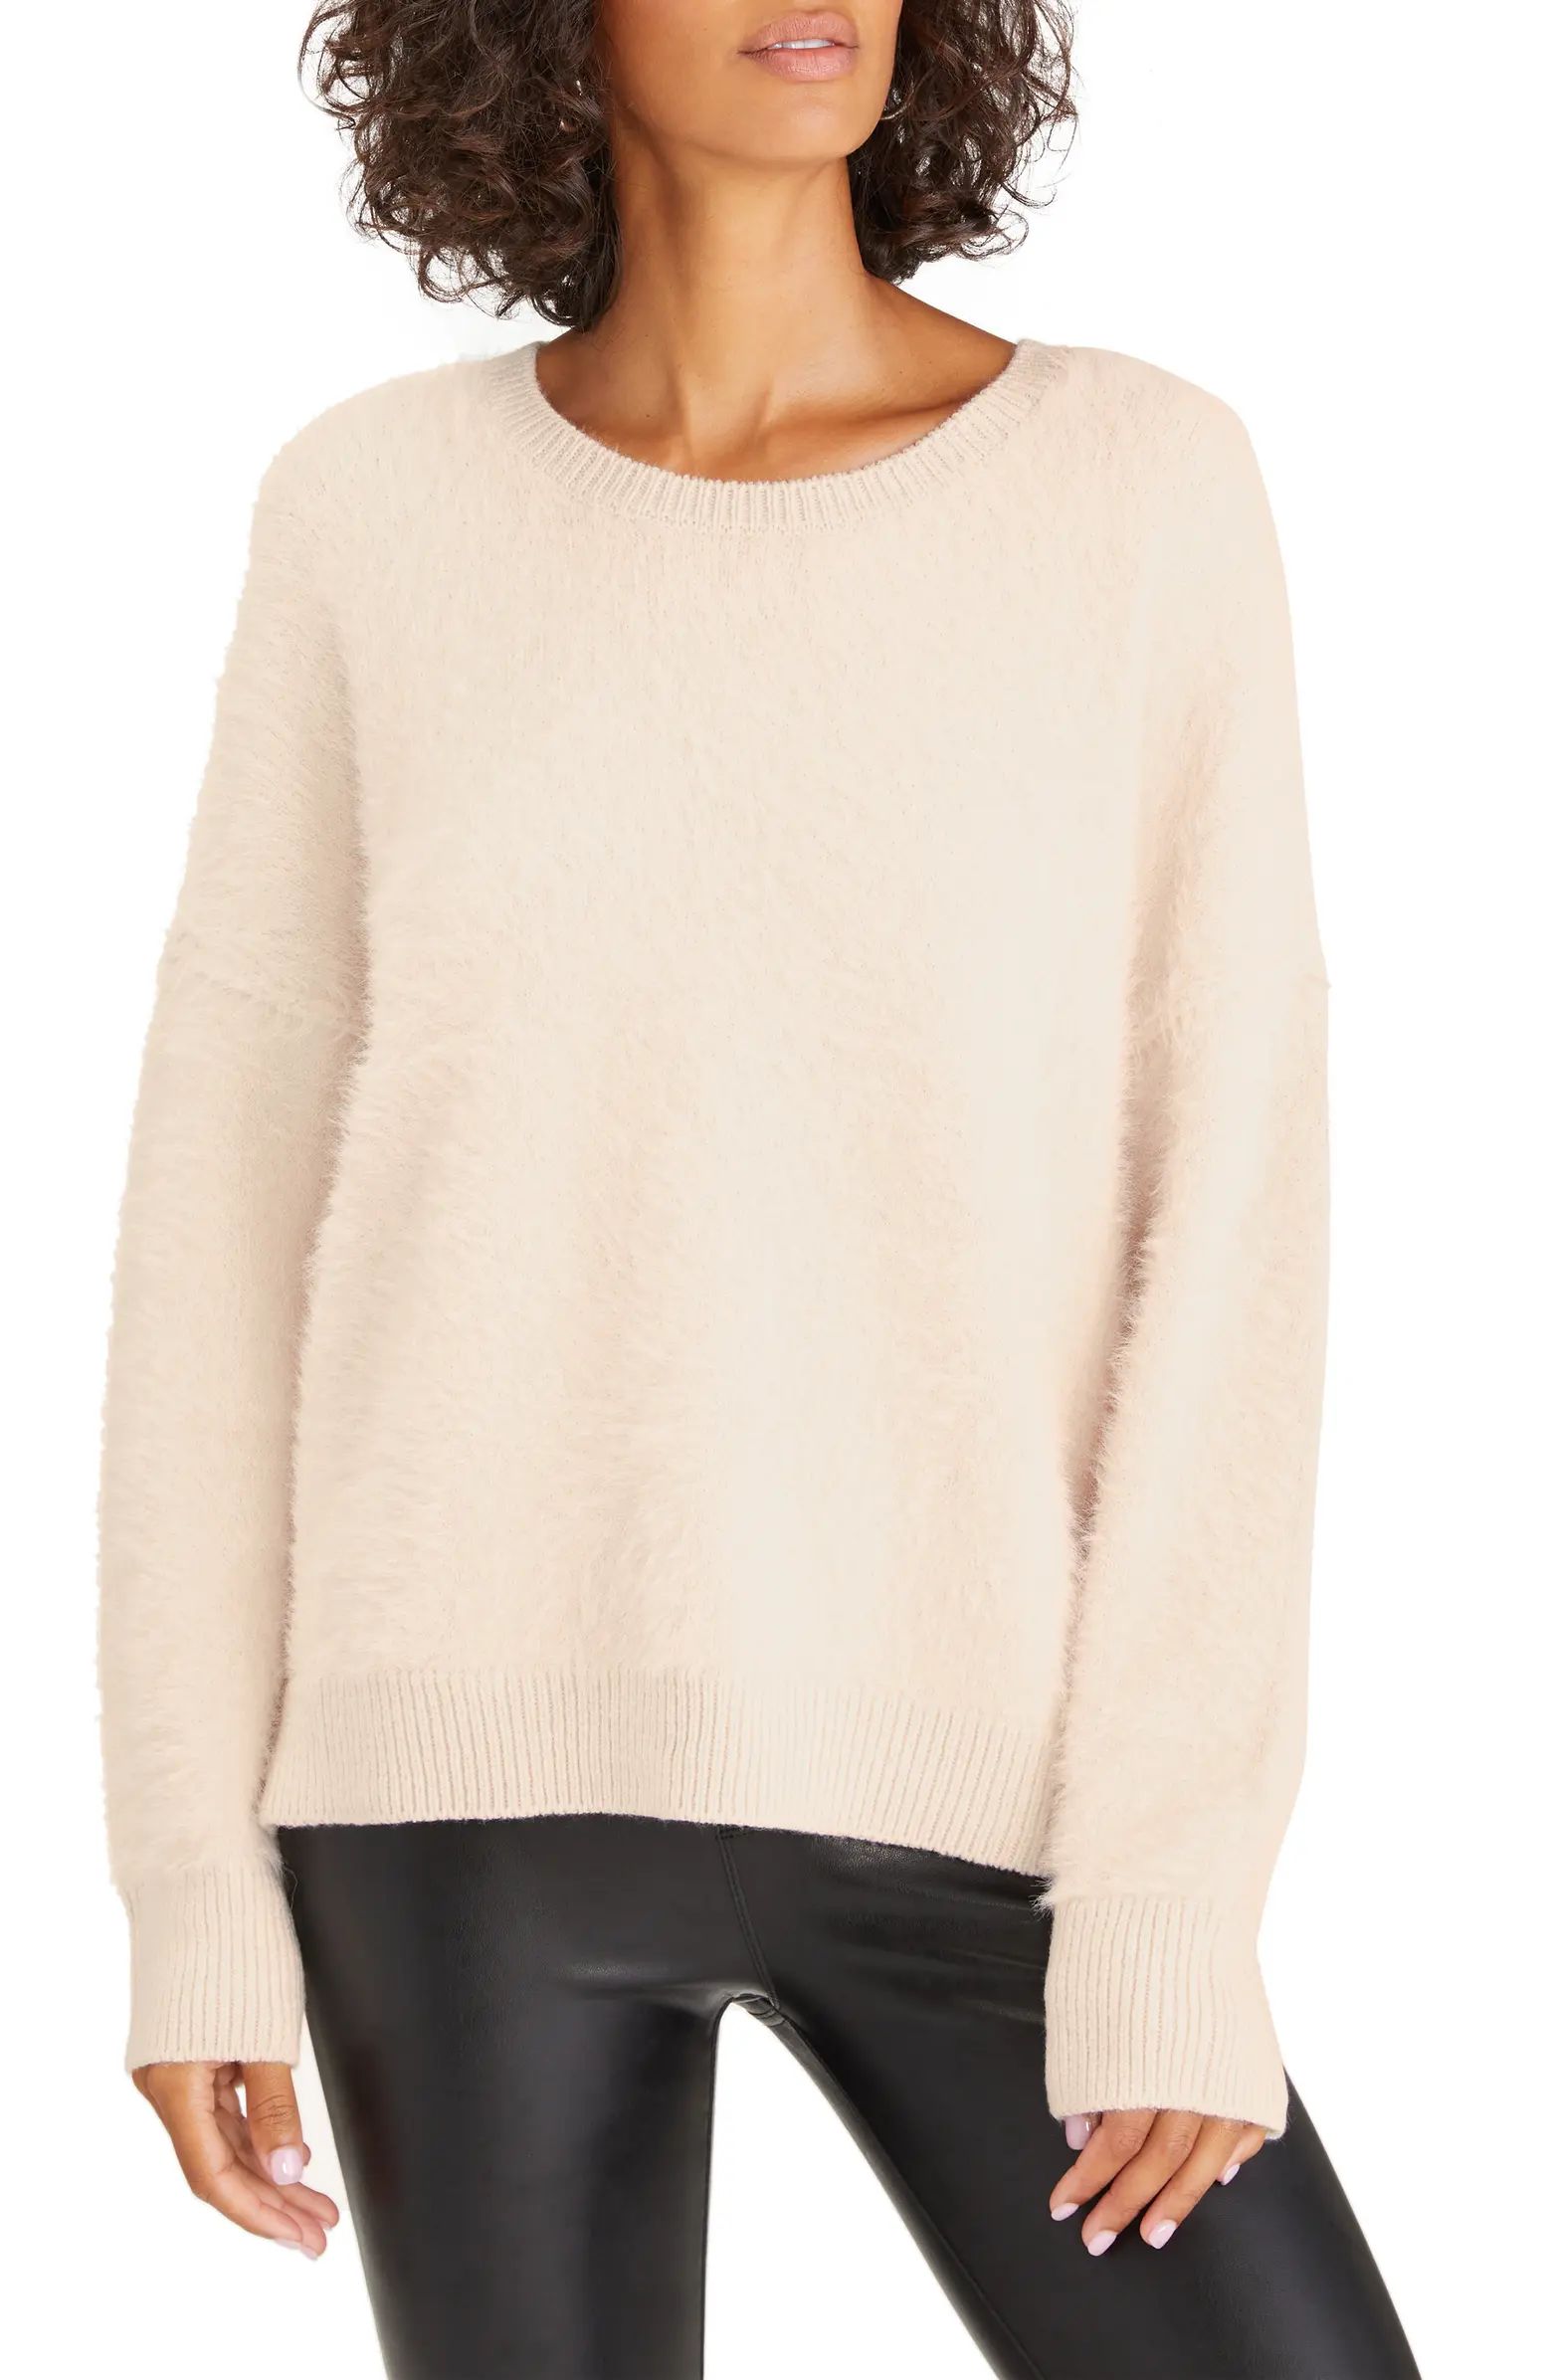 Fluff it Up Sweater | Nordstrom